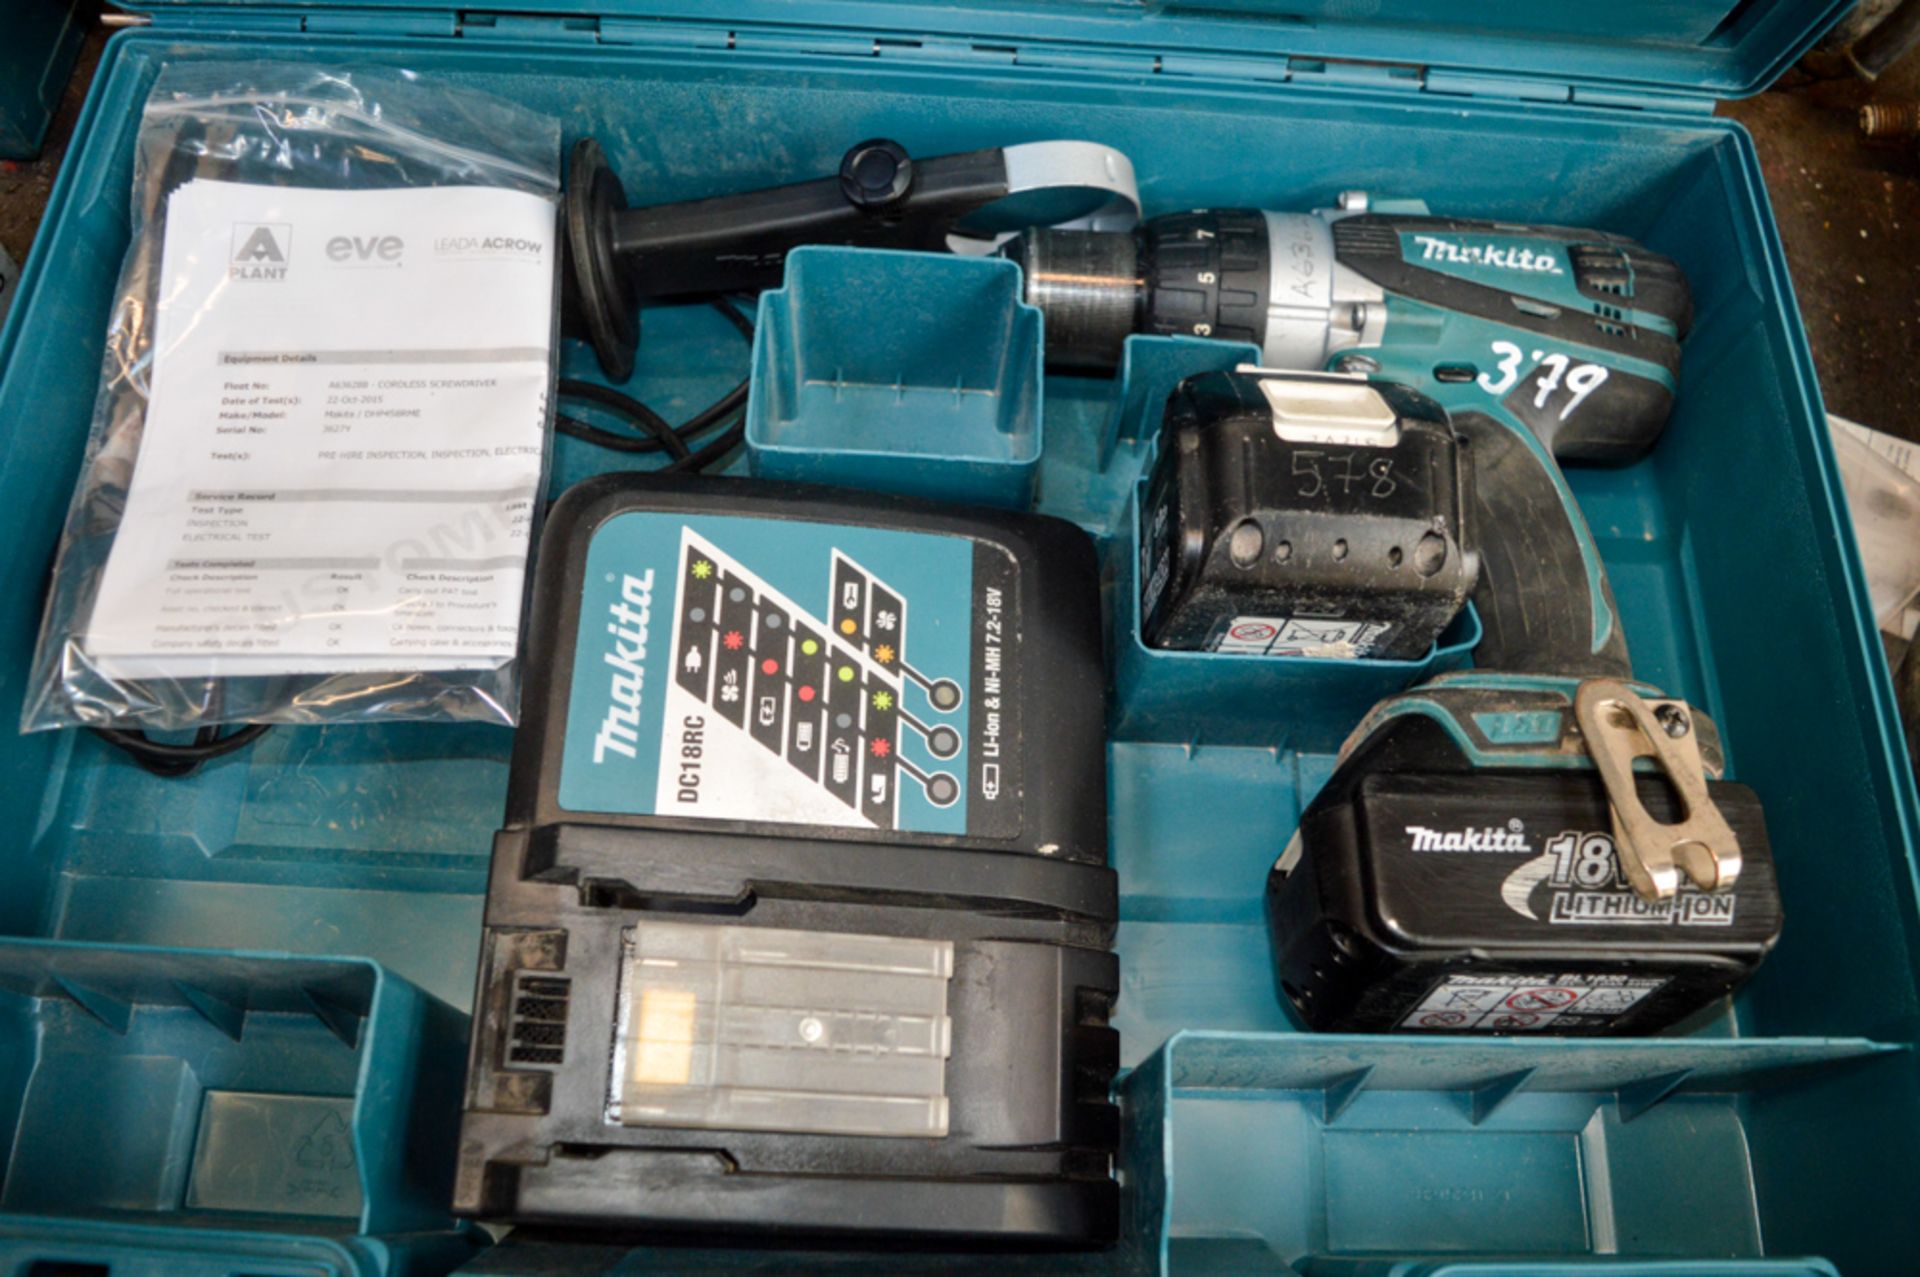 Makita 18v cordless power drill c/w 2 batteries, charger & carry case A636288